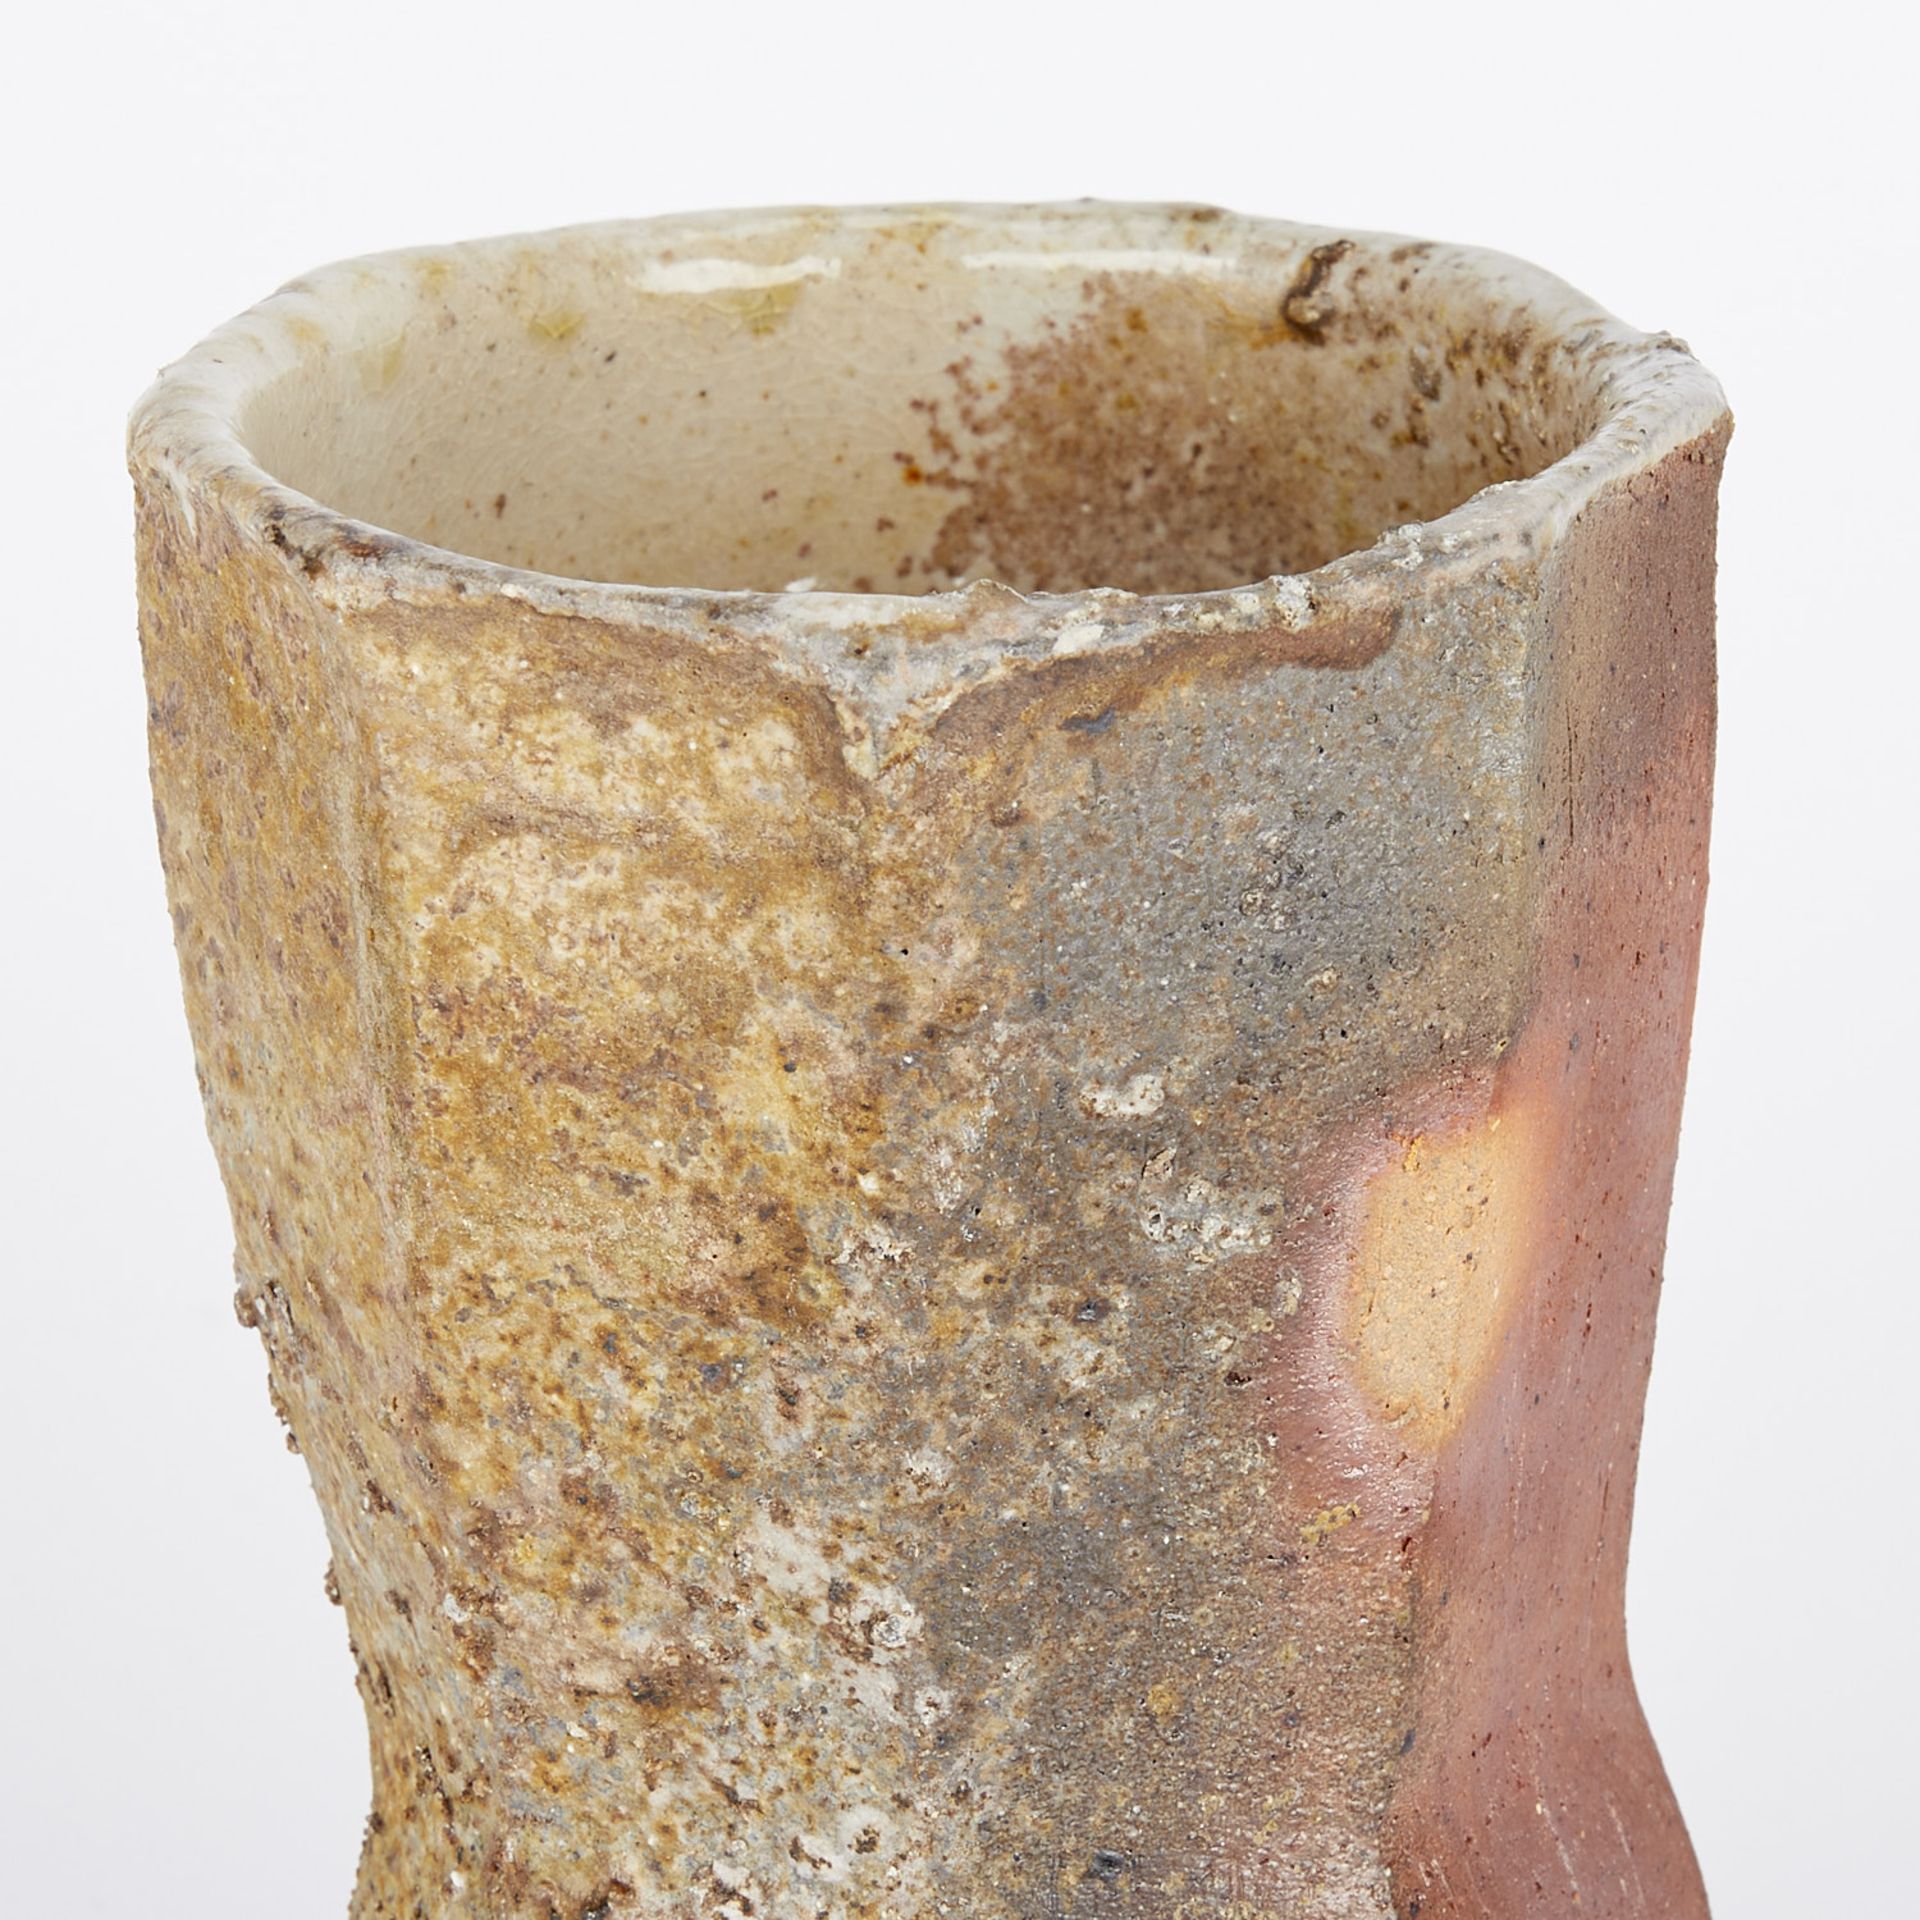 Group of 3 Dick Cooter Ceramic Vessels - Image 8 of 12